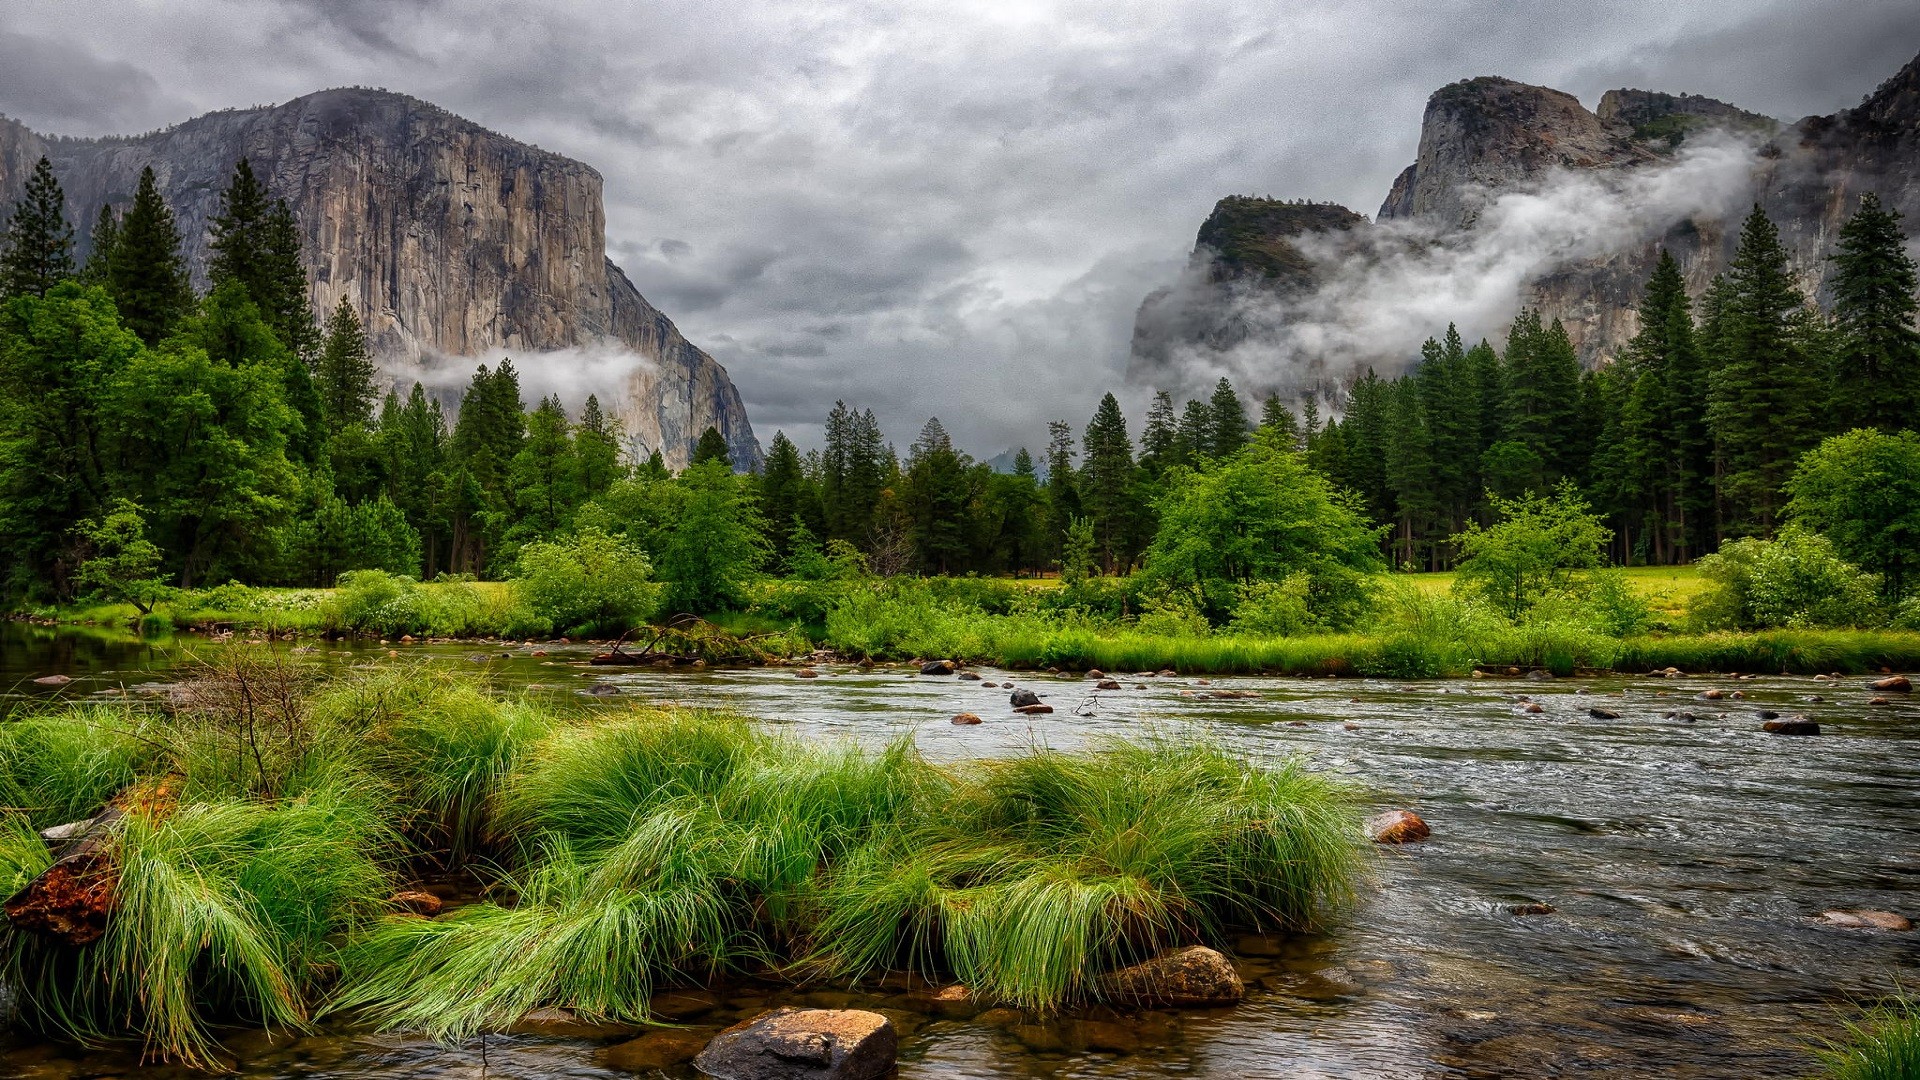 General 1920x1080 nature landscape river mountains pine trees HDR